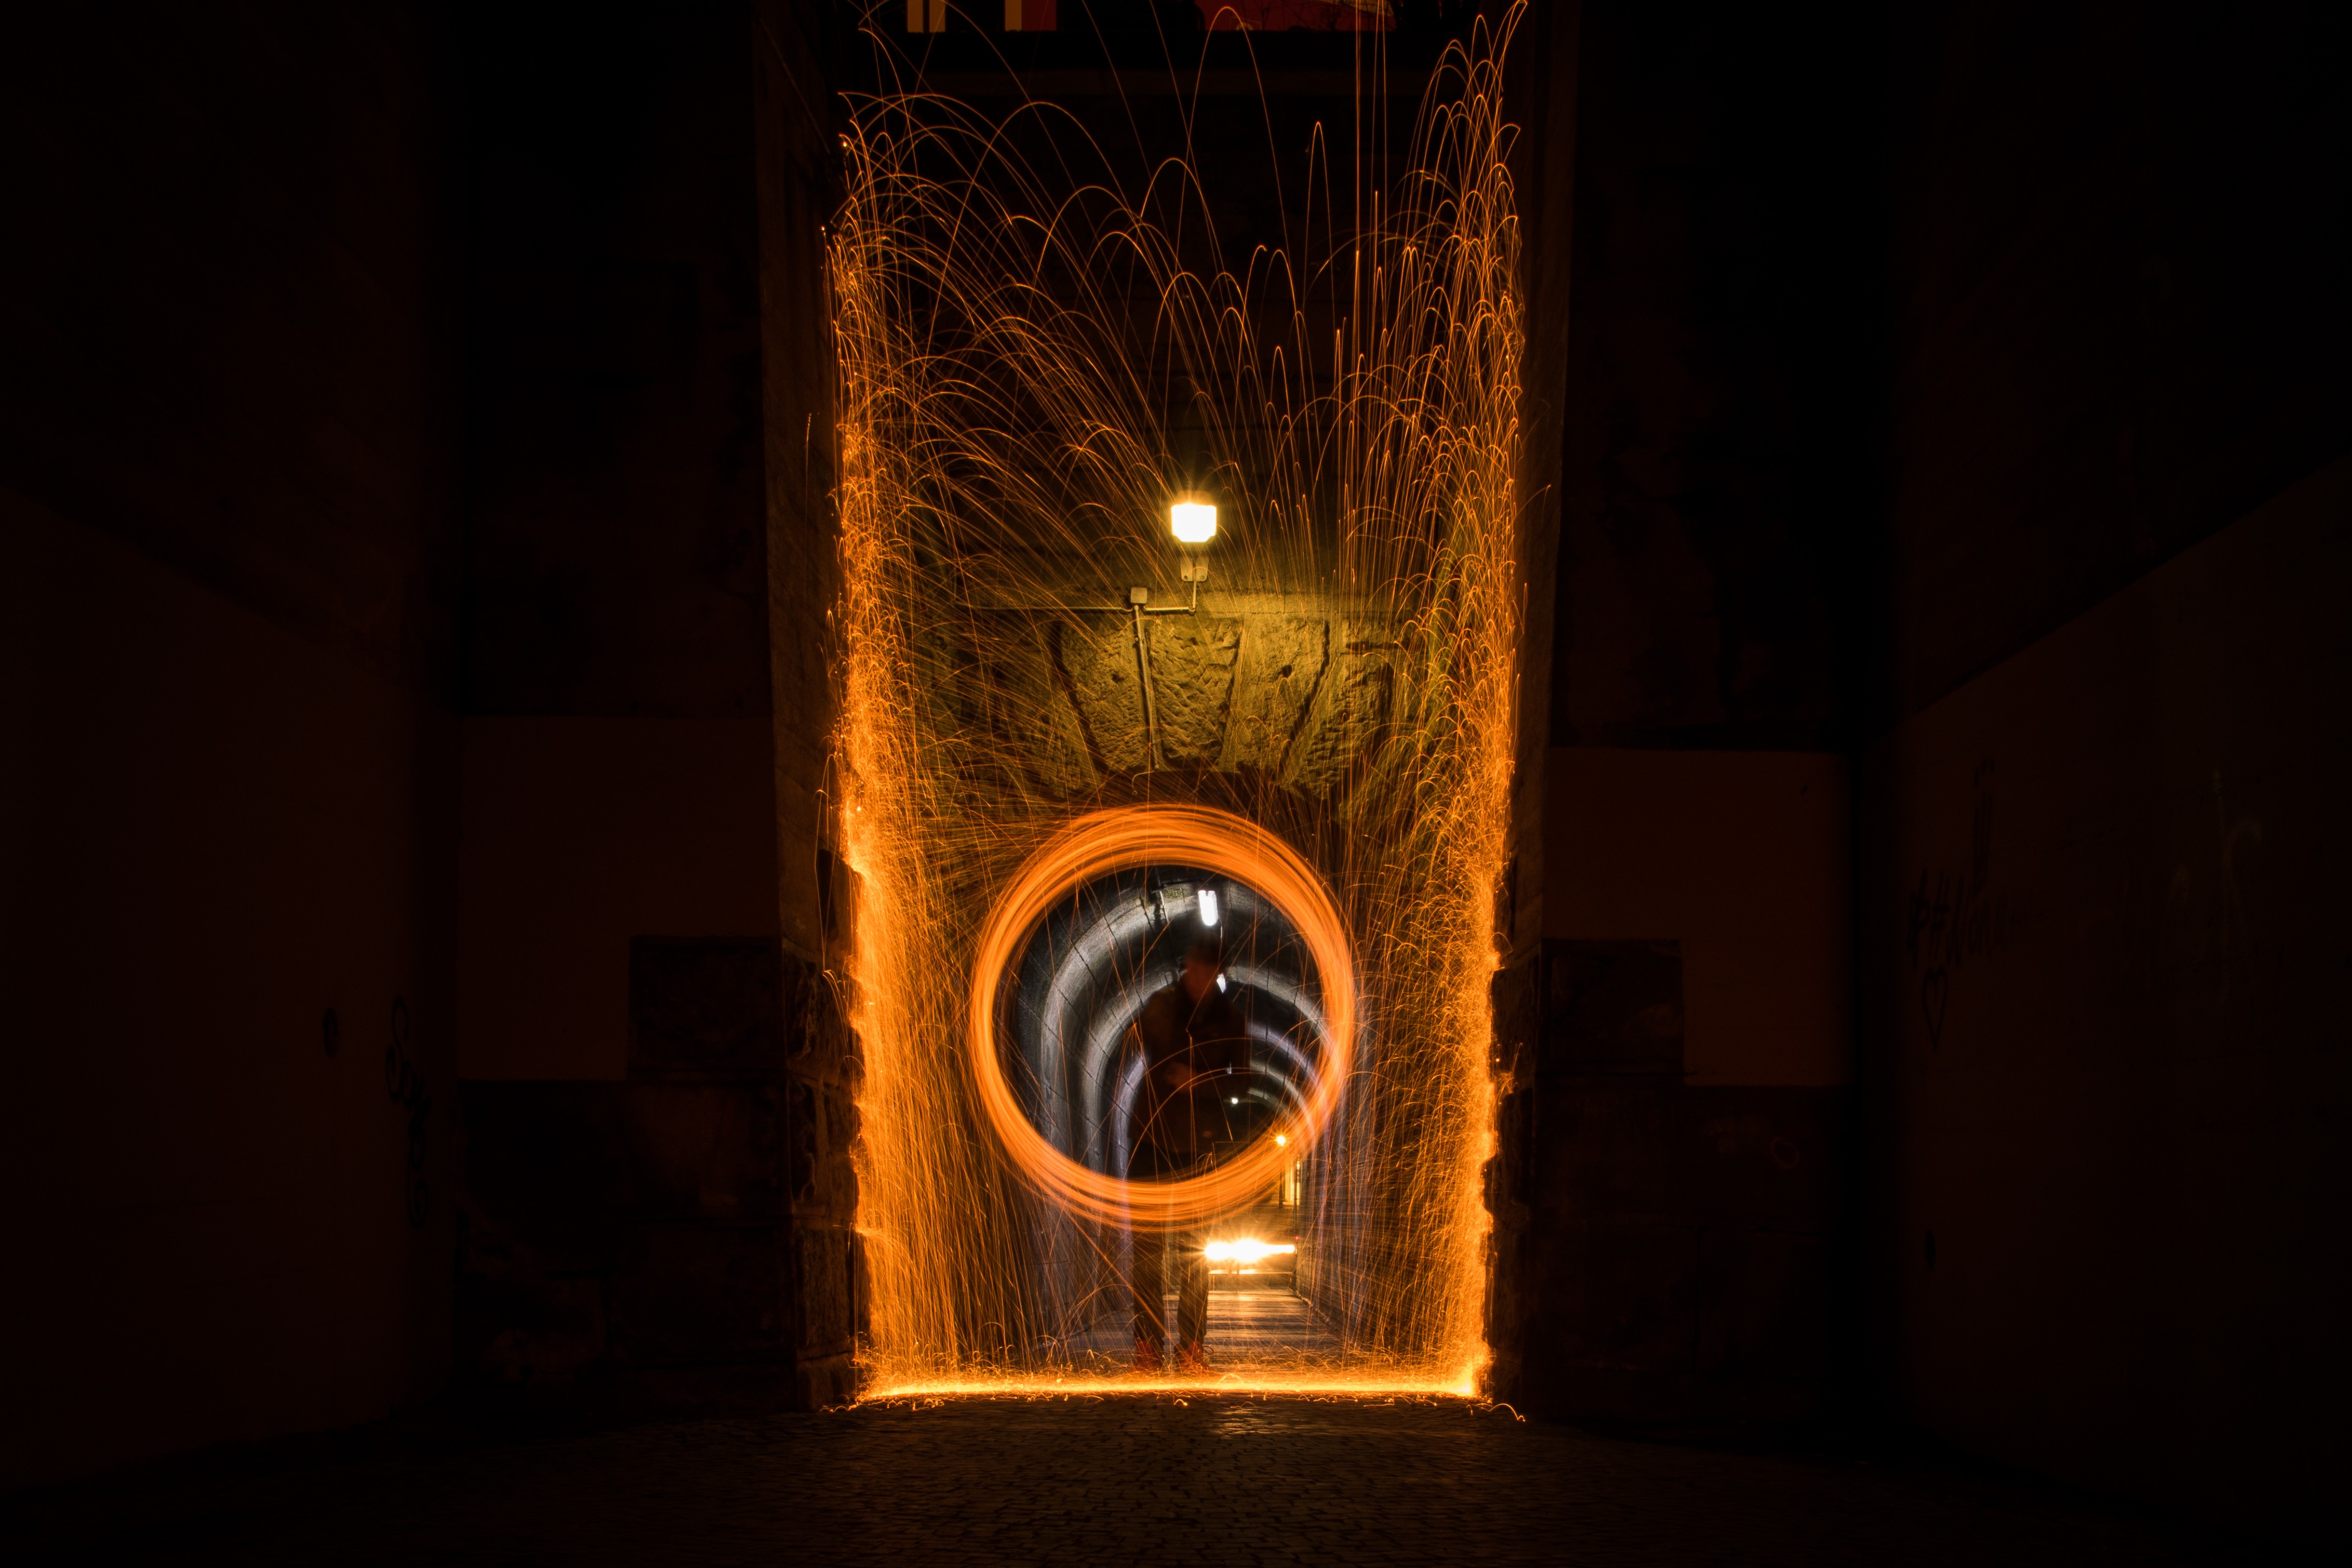 German, Photography, Abstract, Long exposure, Germany, Steel wool, Fire Wallpaper